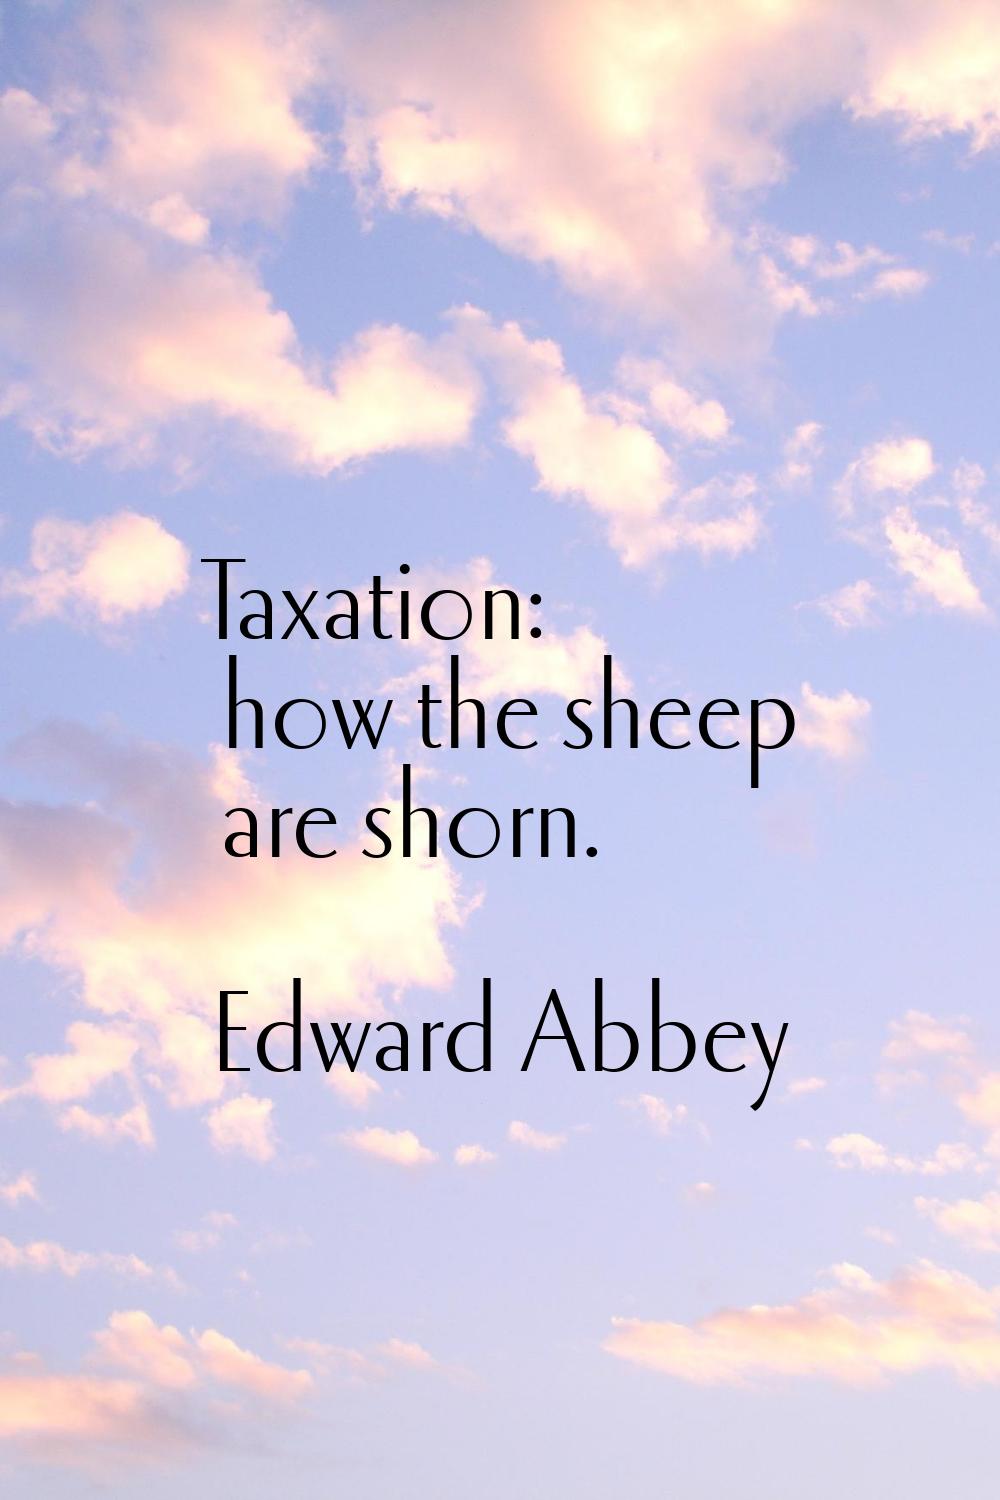 Taxation: how the sheep are shorn.